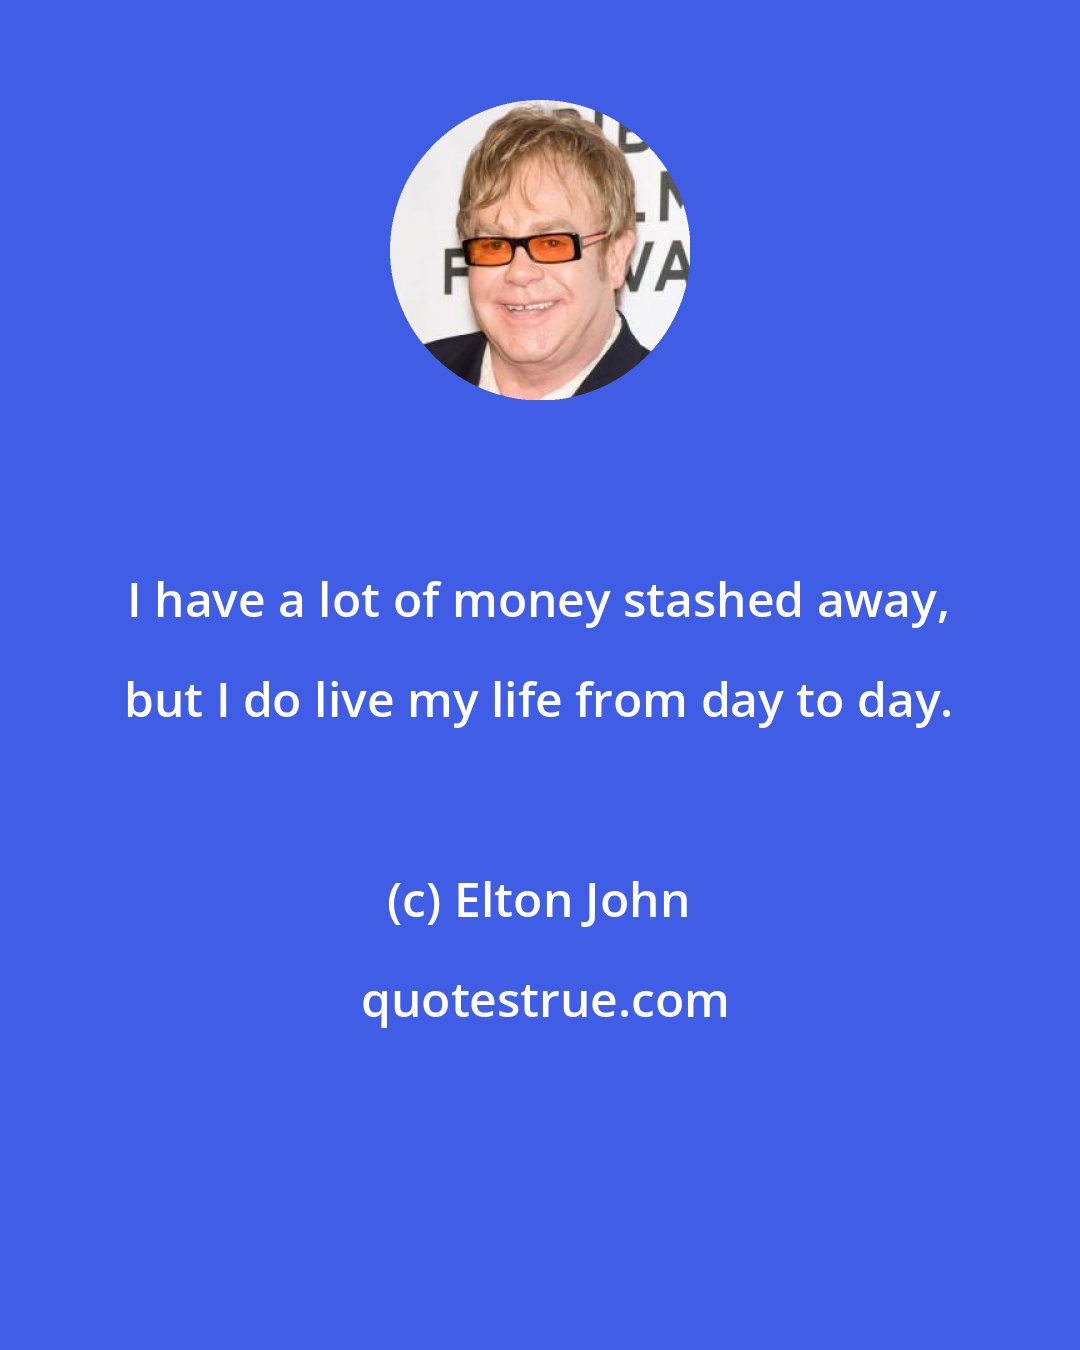 Elton John: I have a lot of money stashed away, but I do live my life from day to day.